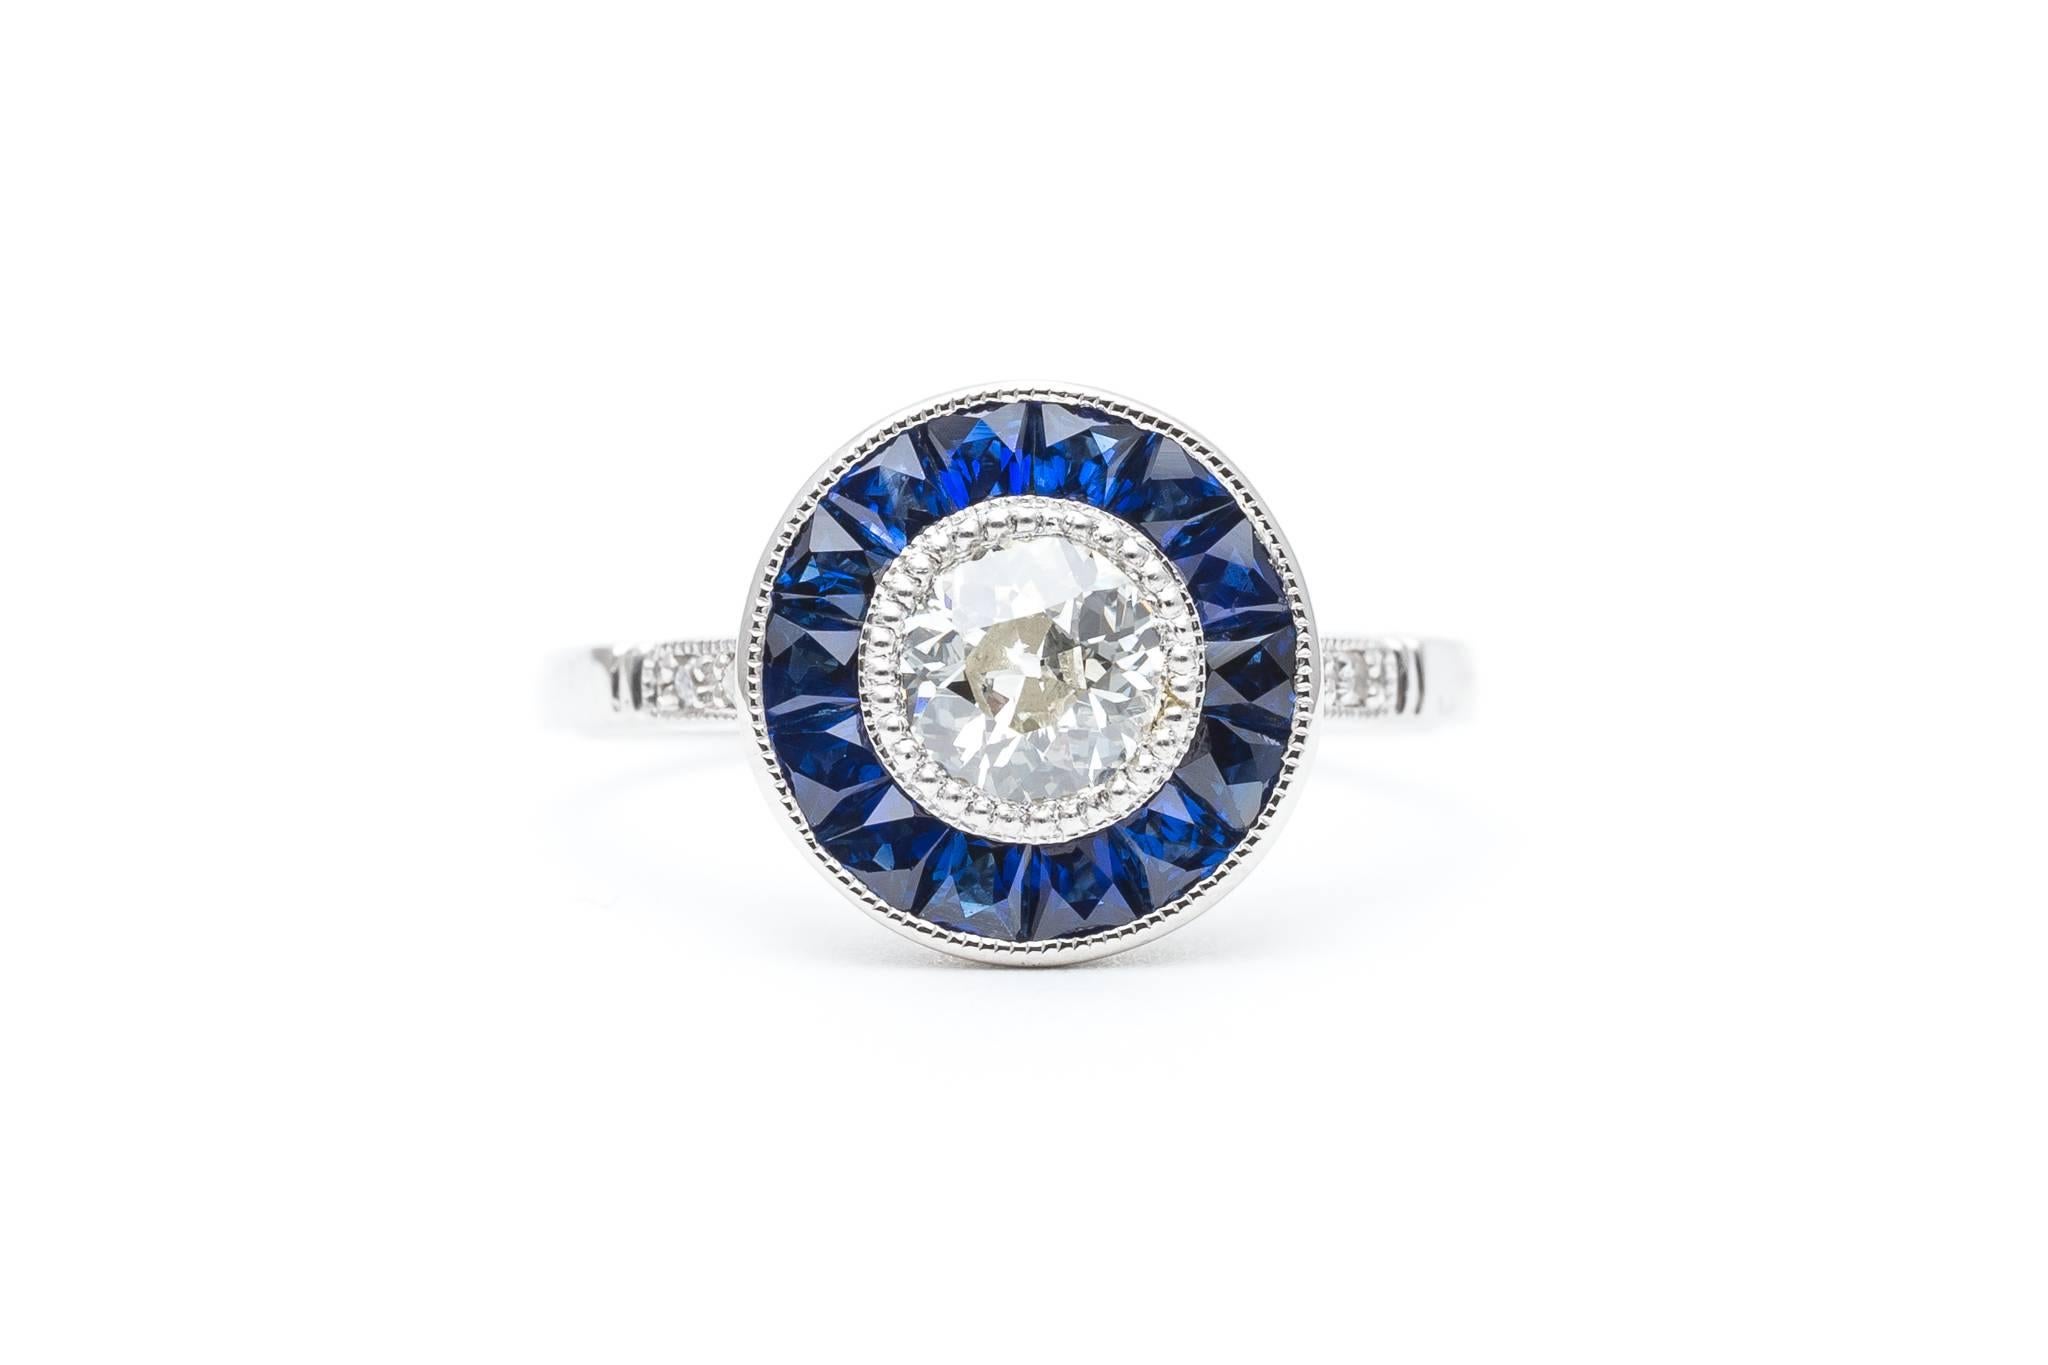 Beacon Hill Jewelers Presents:

A stunning diamond and sapphire target ring in luxurious platinum. Completely hand crafted, this stunning target ring is a prime example of a French style engagement ring. Centered by a single antique European cut